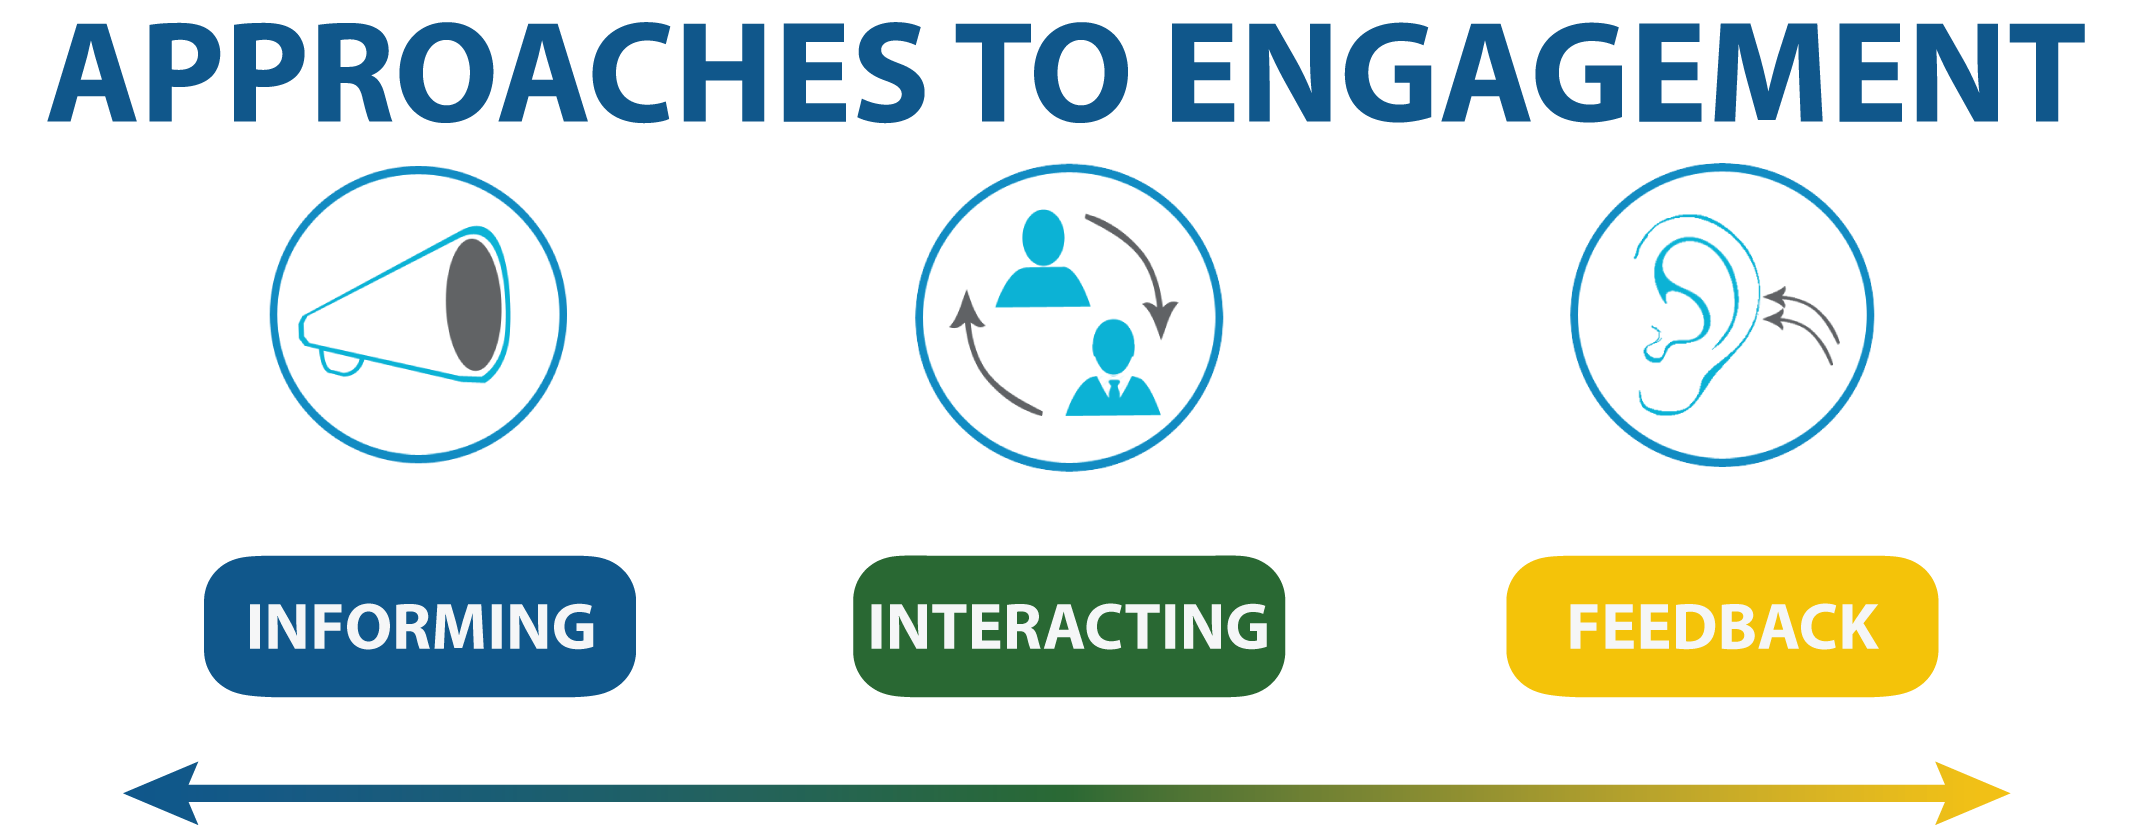 Approaches to Engagement - Informing, Interacting, and Feedback. click or press enter to view larger.